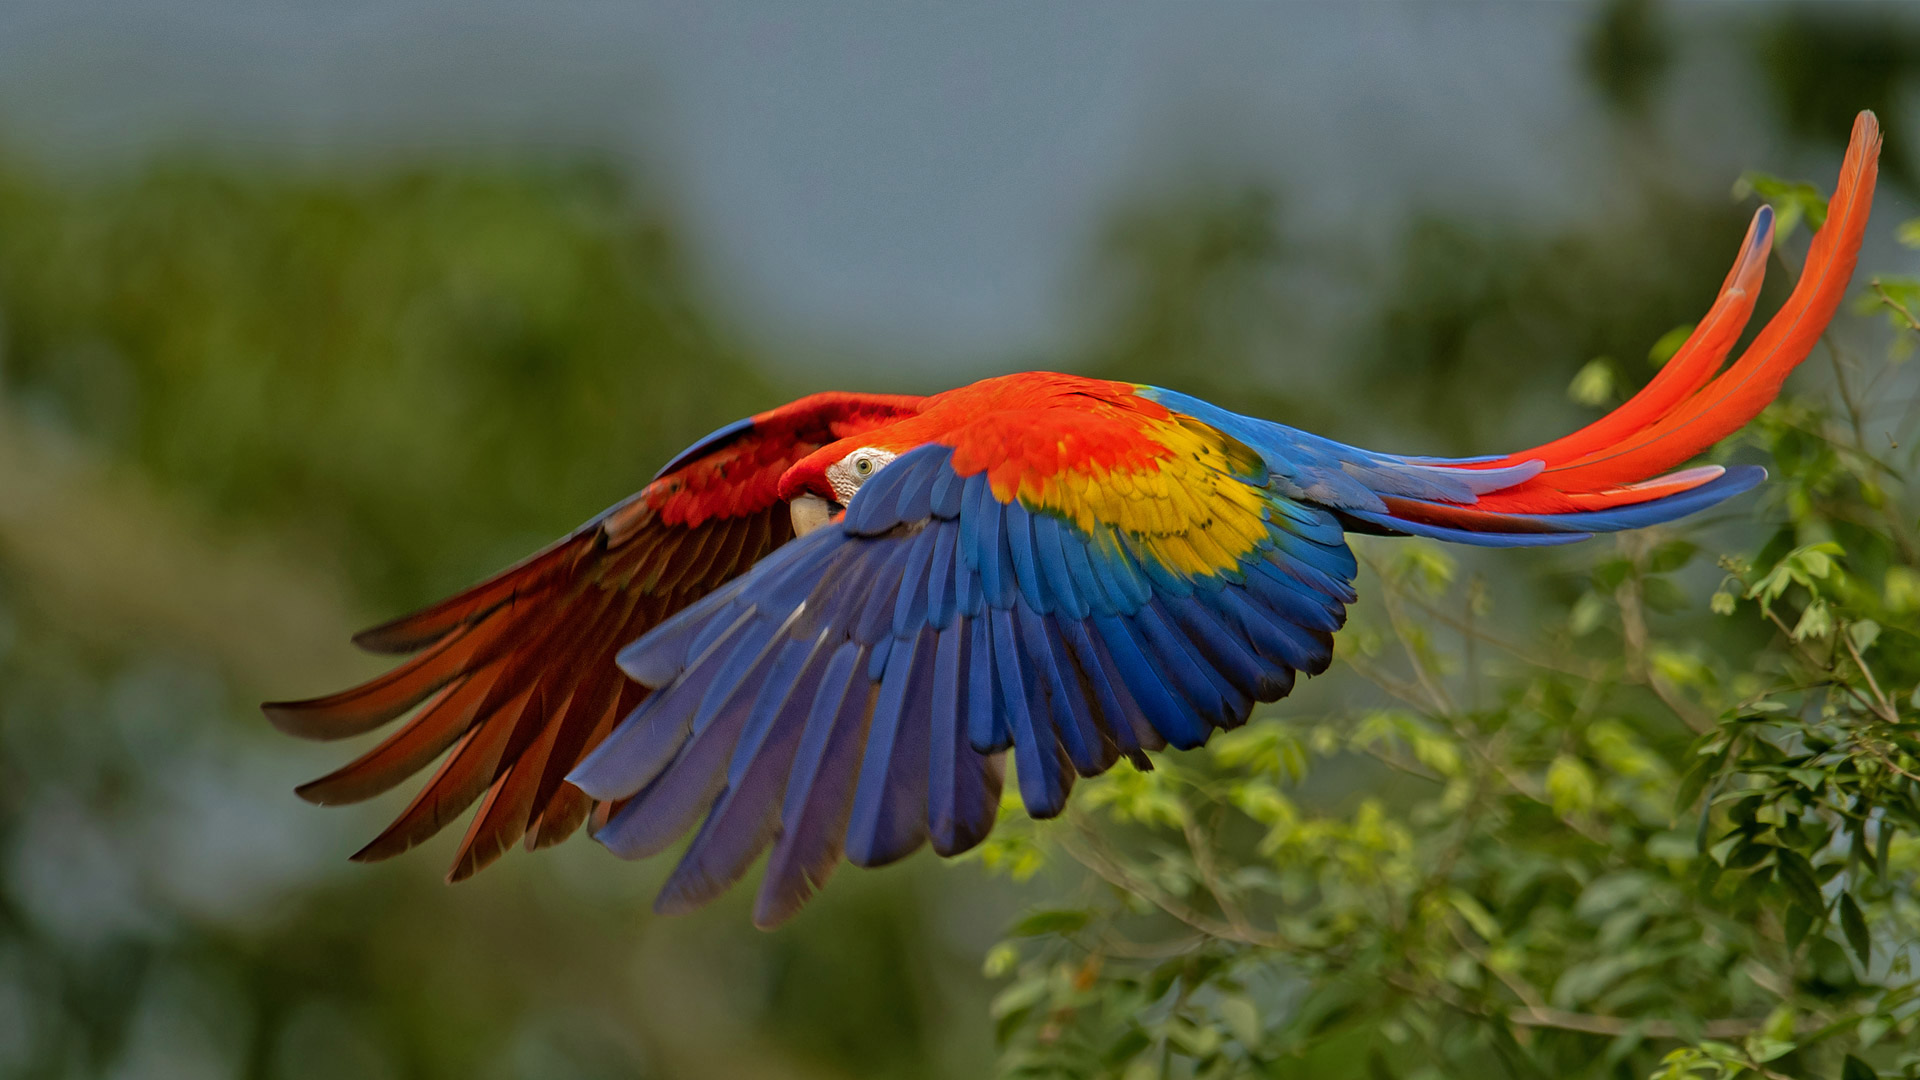 Scarlet macaw in Costa Rica - Harry Collins/Getty Images)